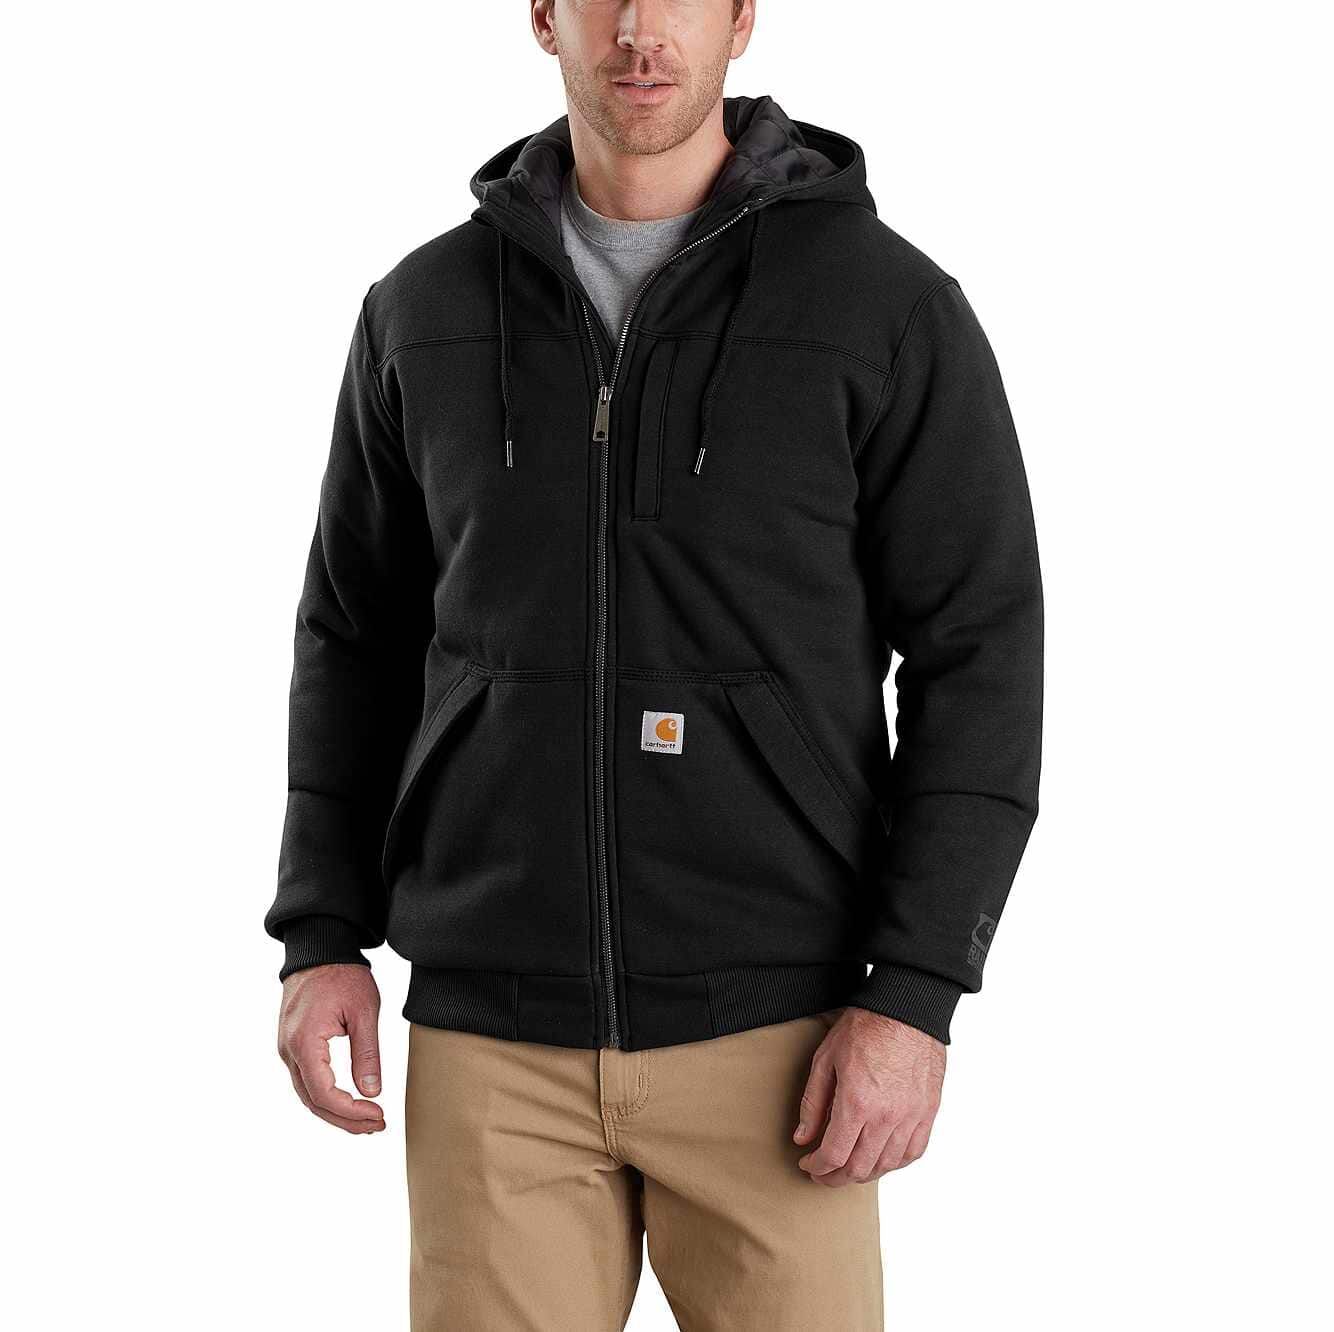 Rockland Quilted Lined Hooded Sweatshirt